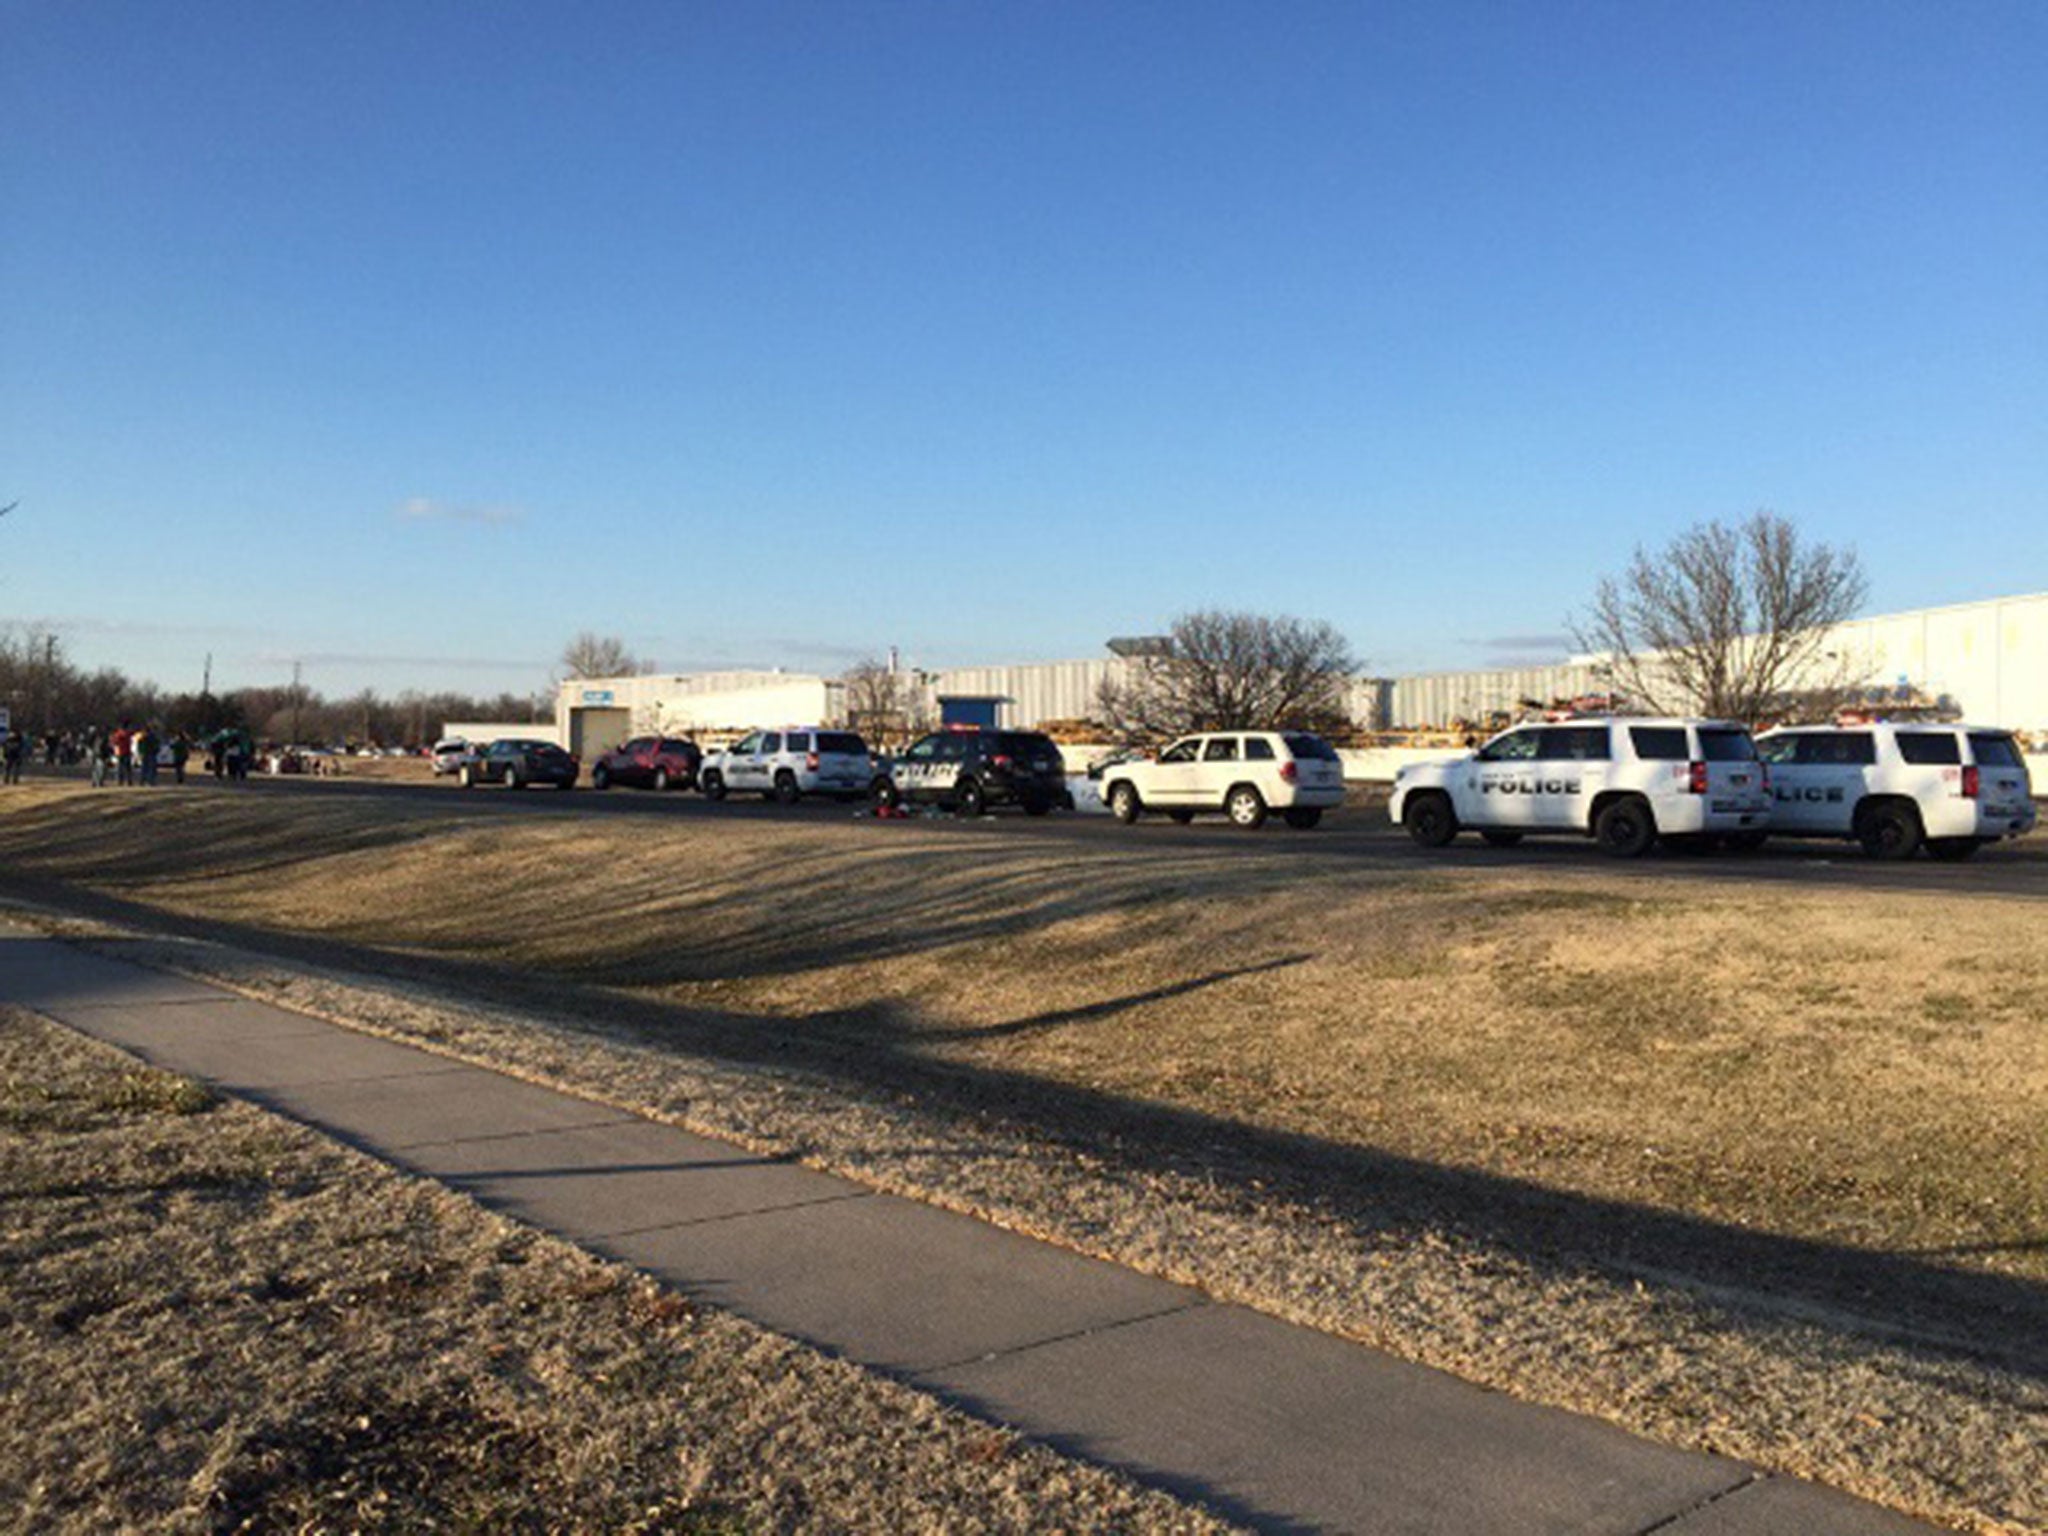 Police vehicles line the road after reports of a shooting at an industrial site in Hesston, Kansas